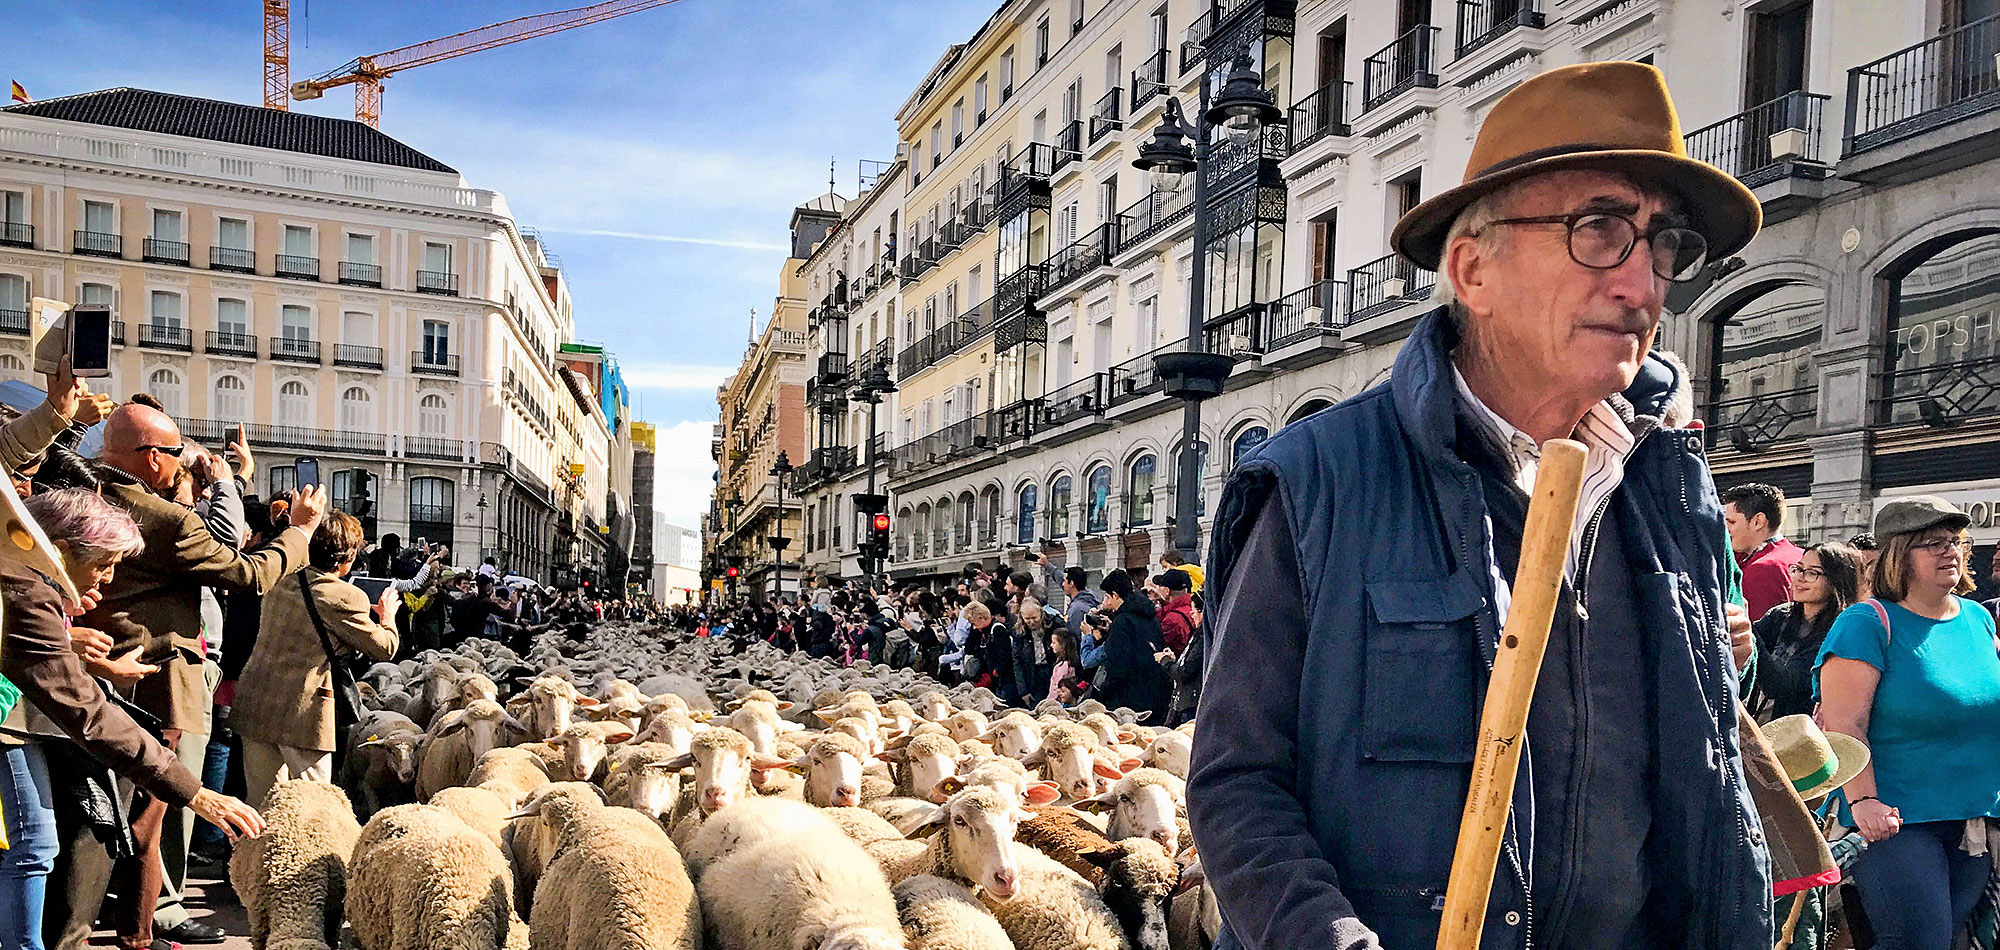 shepherd and his sheep move through streets of Madrid while tourists snap photos